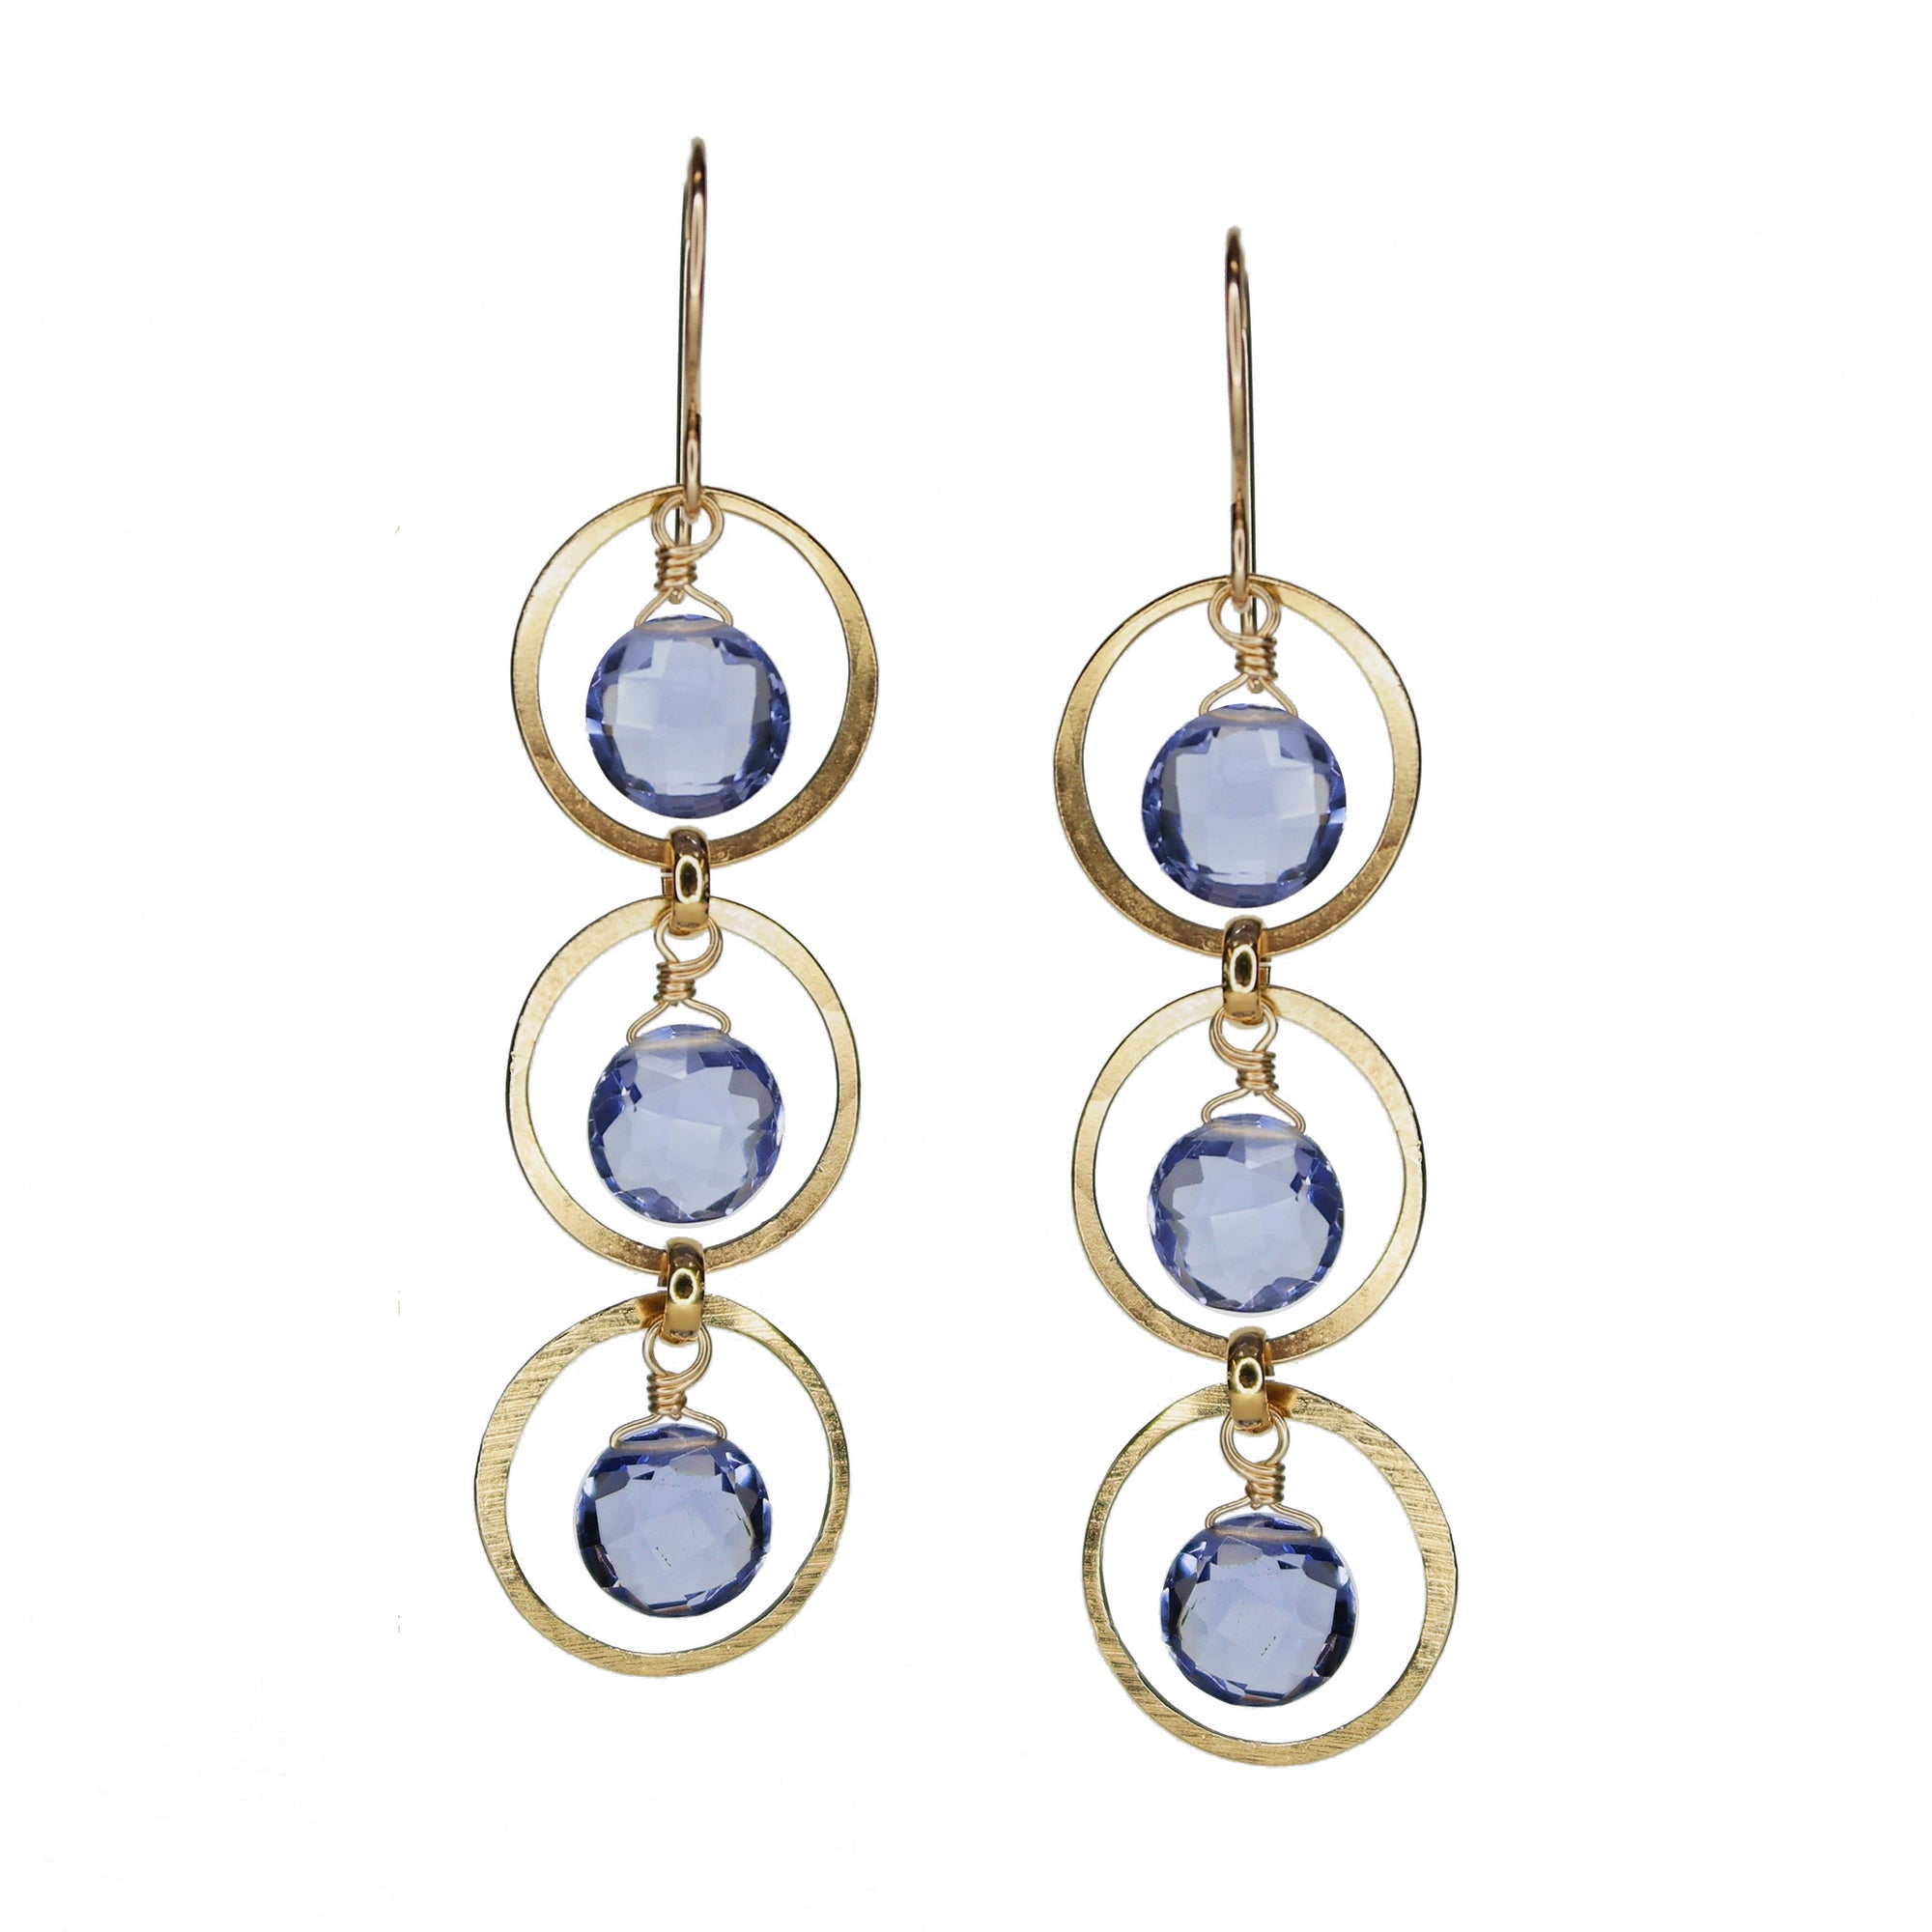 Triple Gems in Gold Forged Circles - Iolite